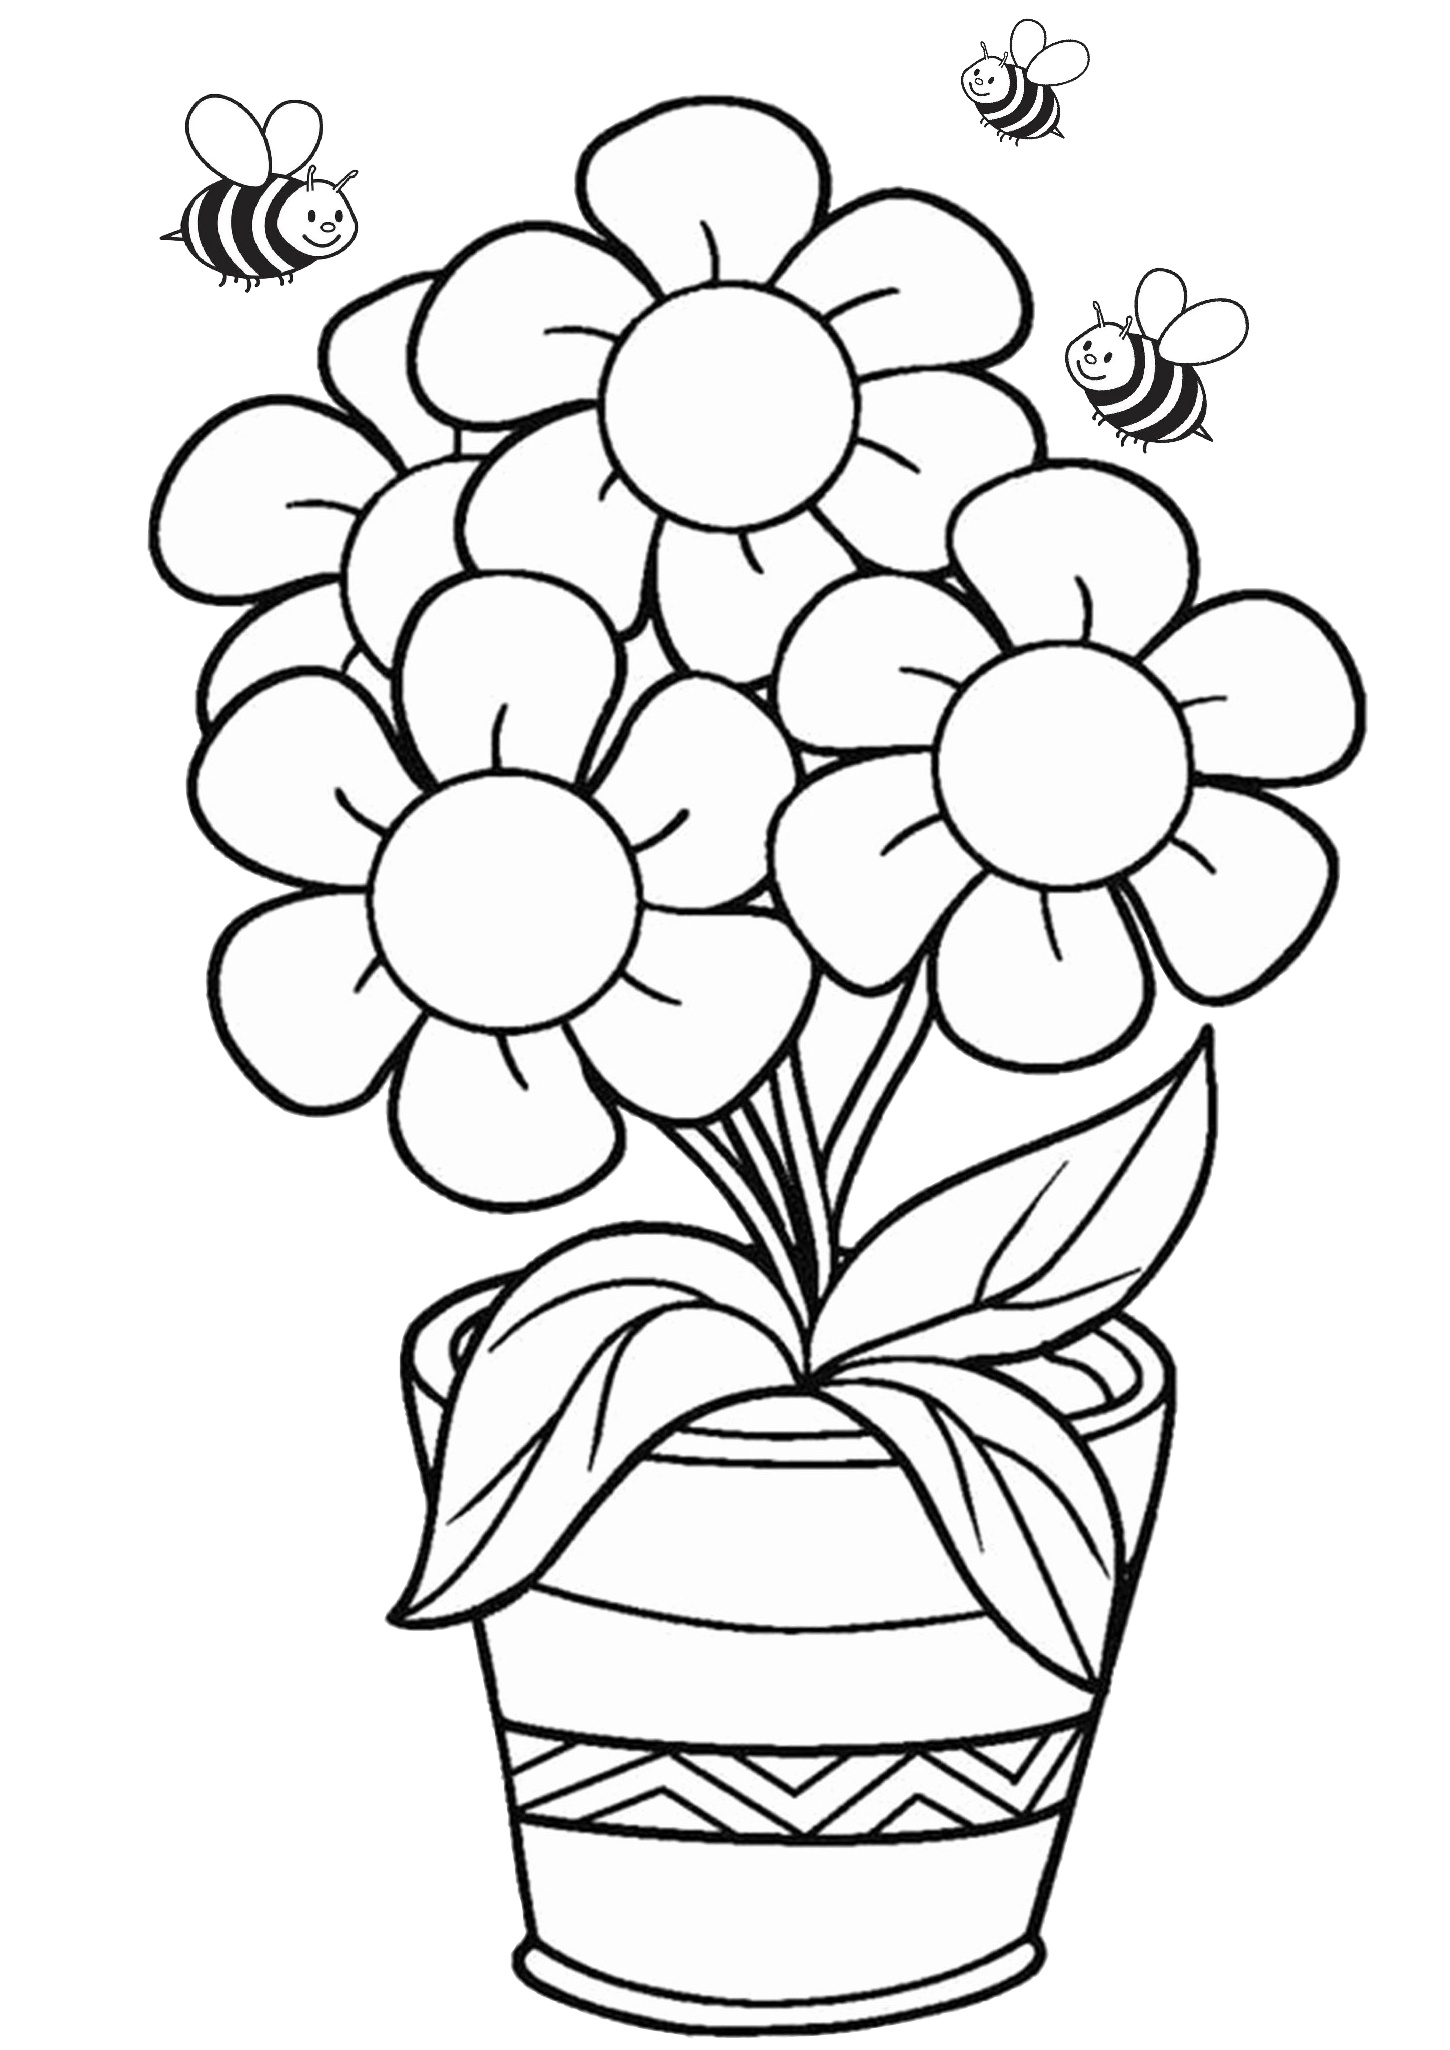 Free Printable Coloring Pages Pdf Free Printable Templates